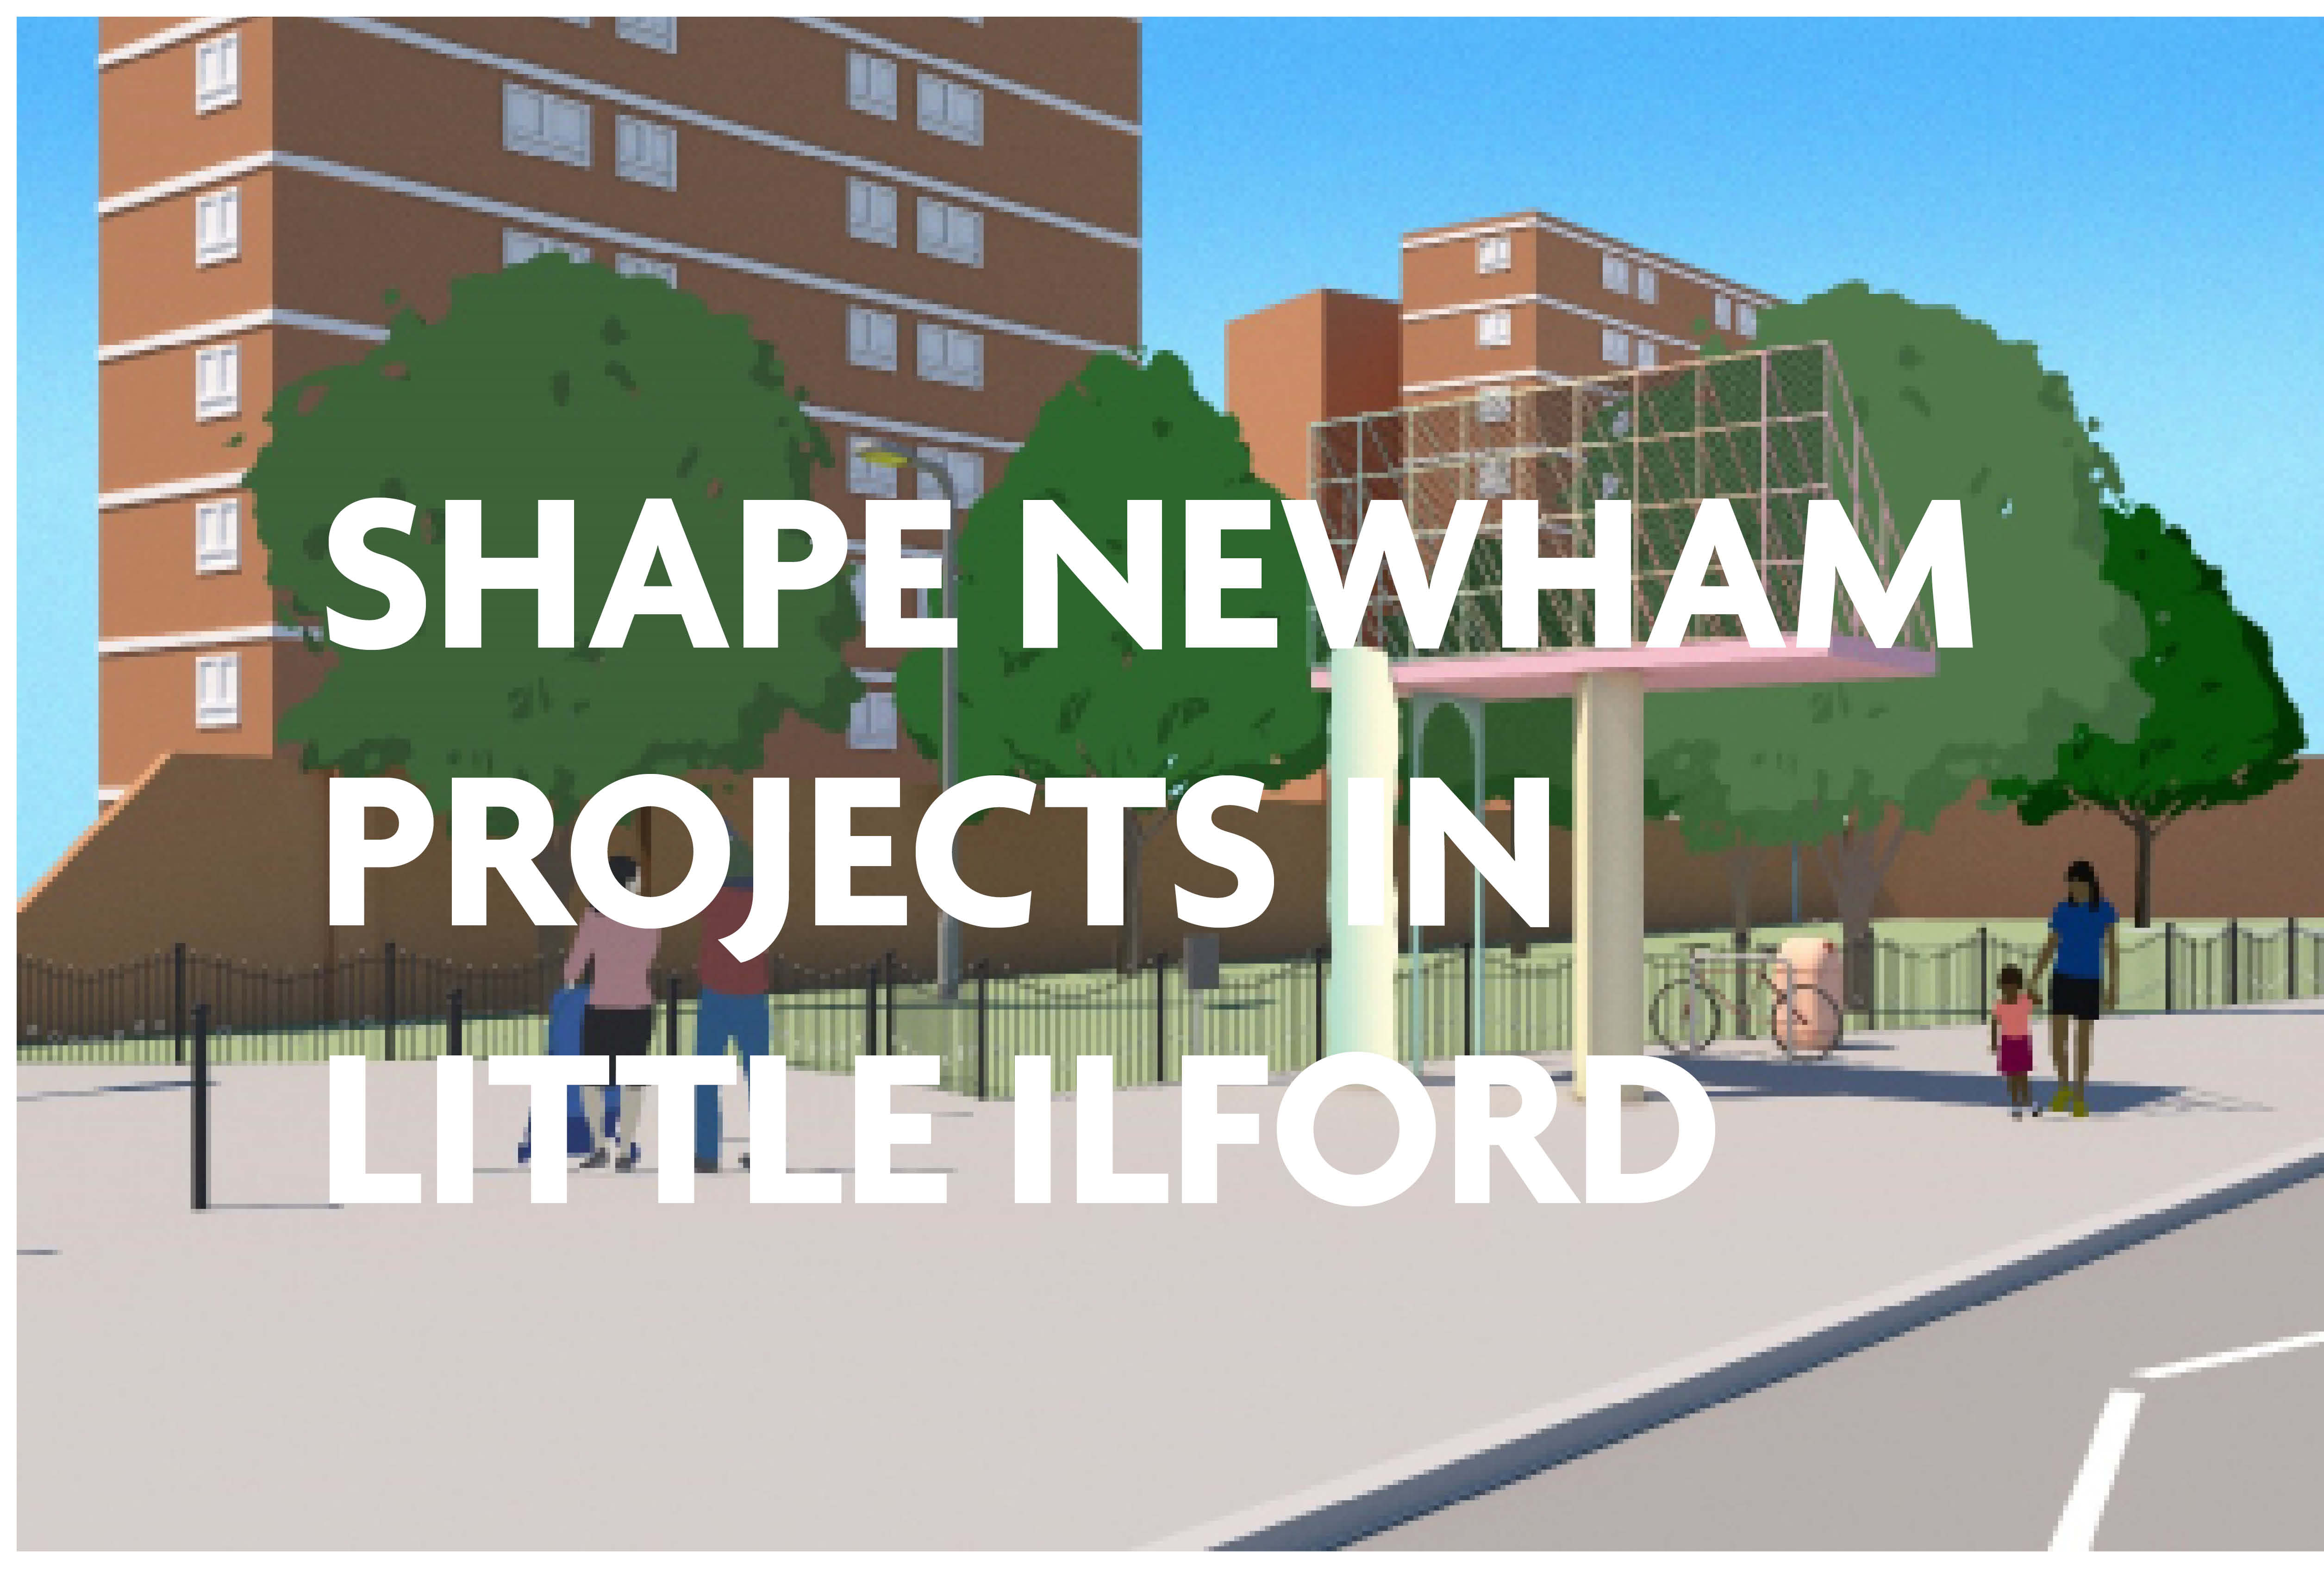 Projects in Little Ilford